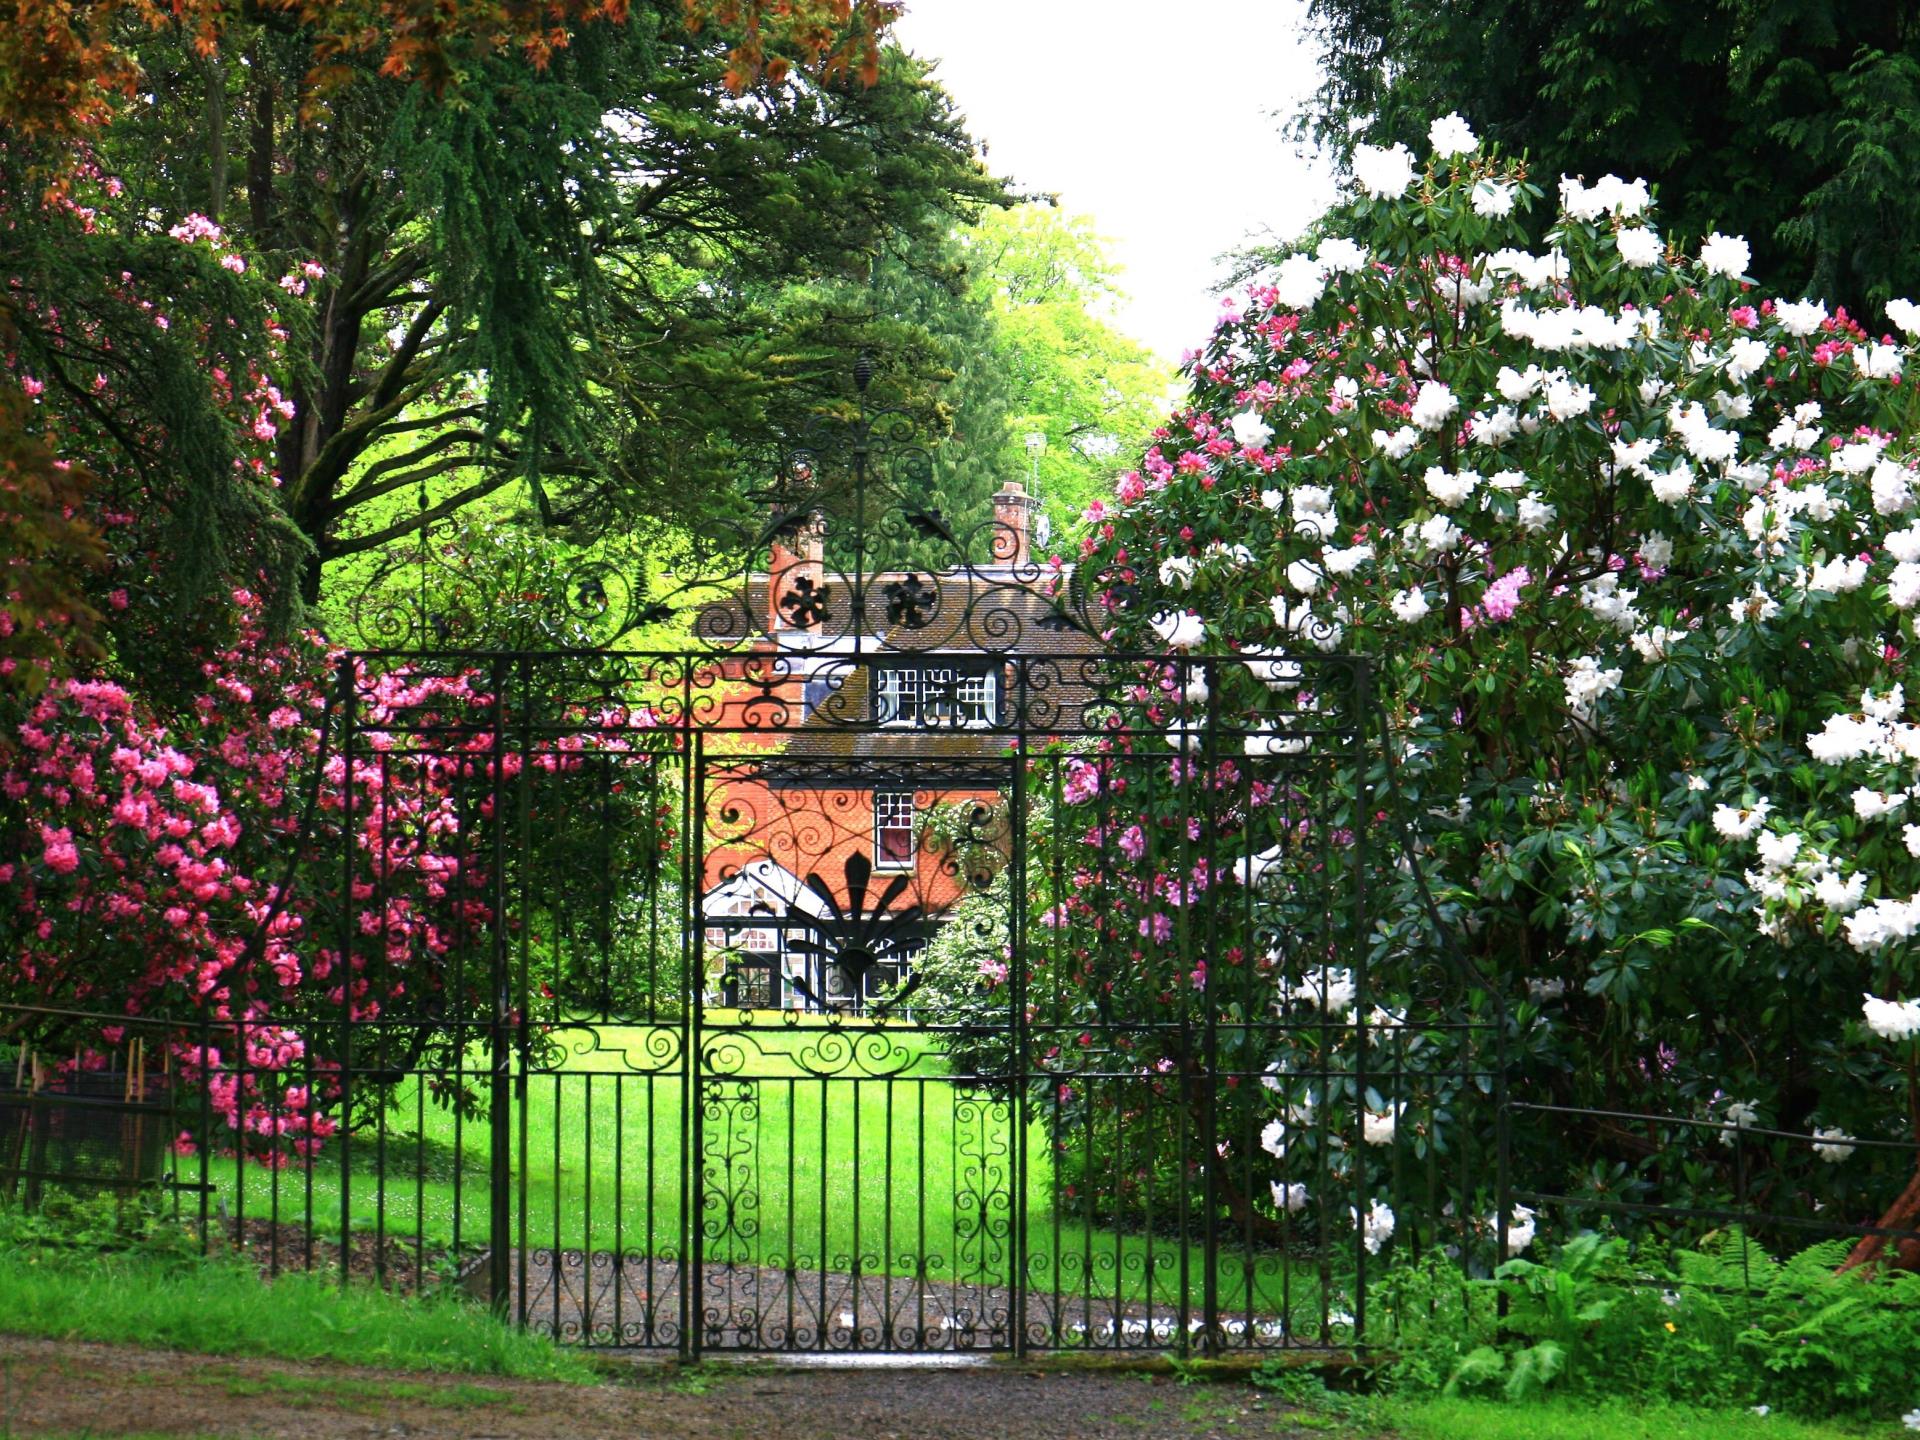 The Iconic Wembley Gate in bloom